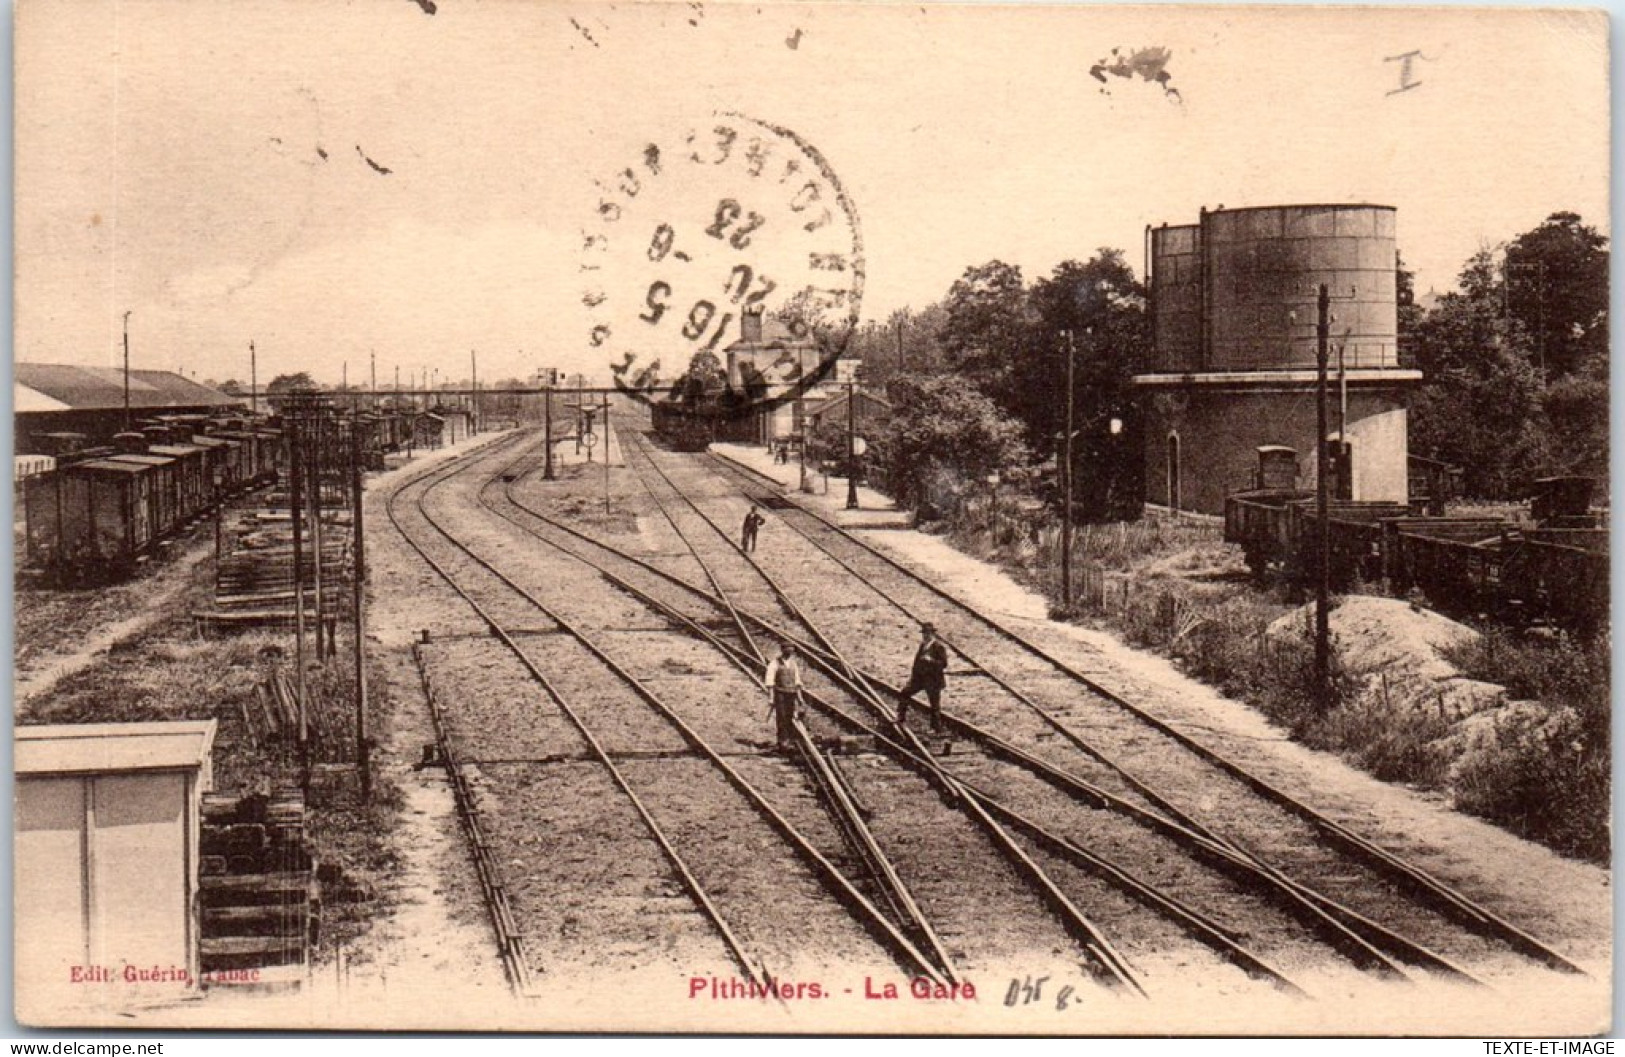 45 PITHIVIERS - La Gare.  - Pithiviers